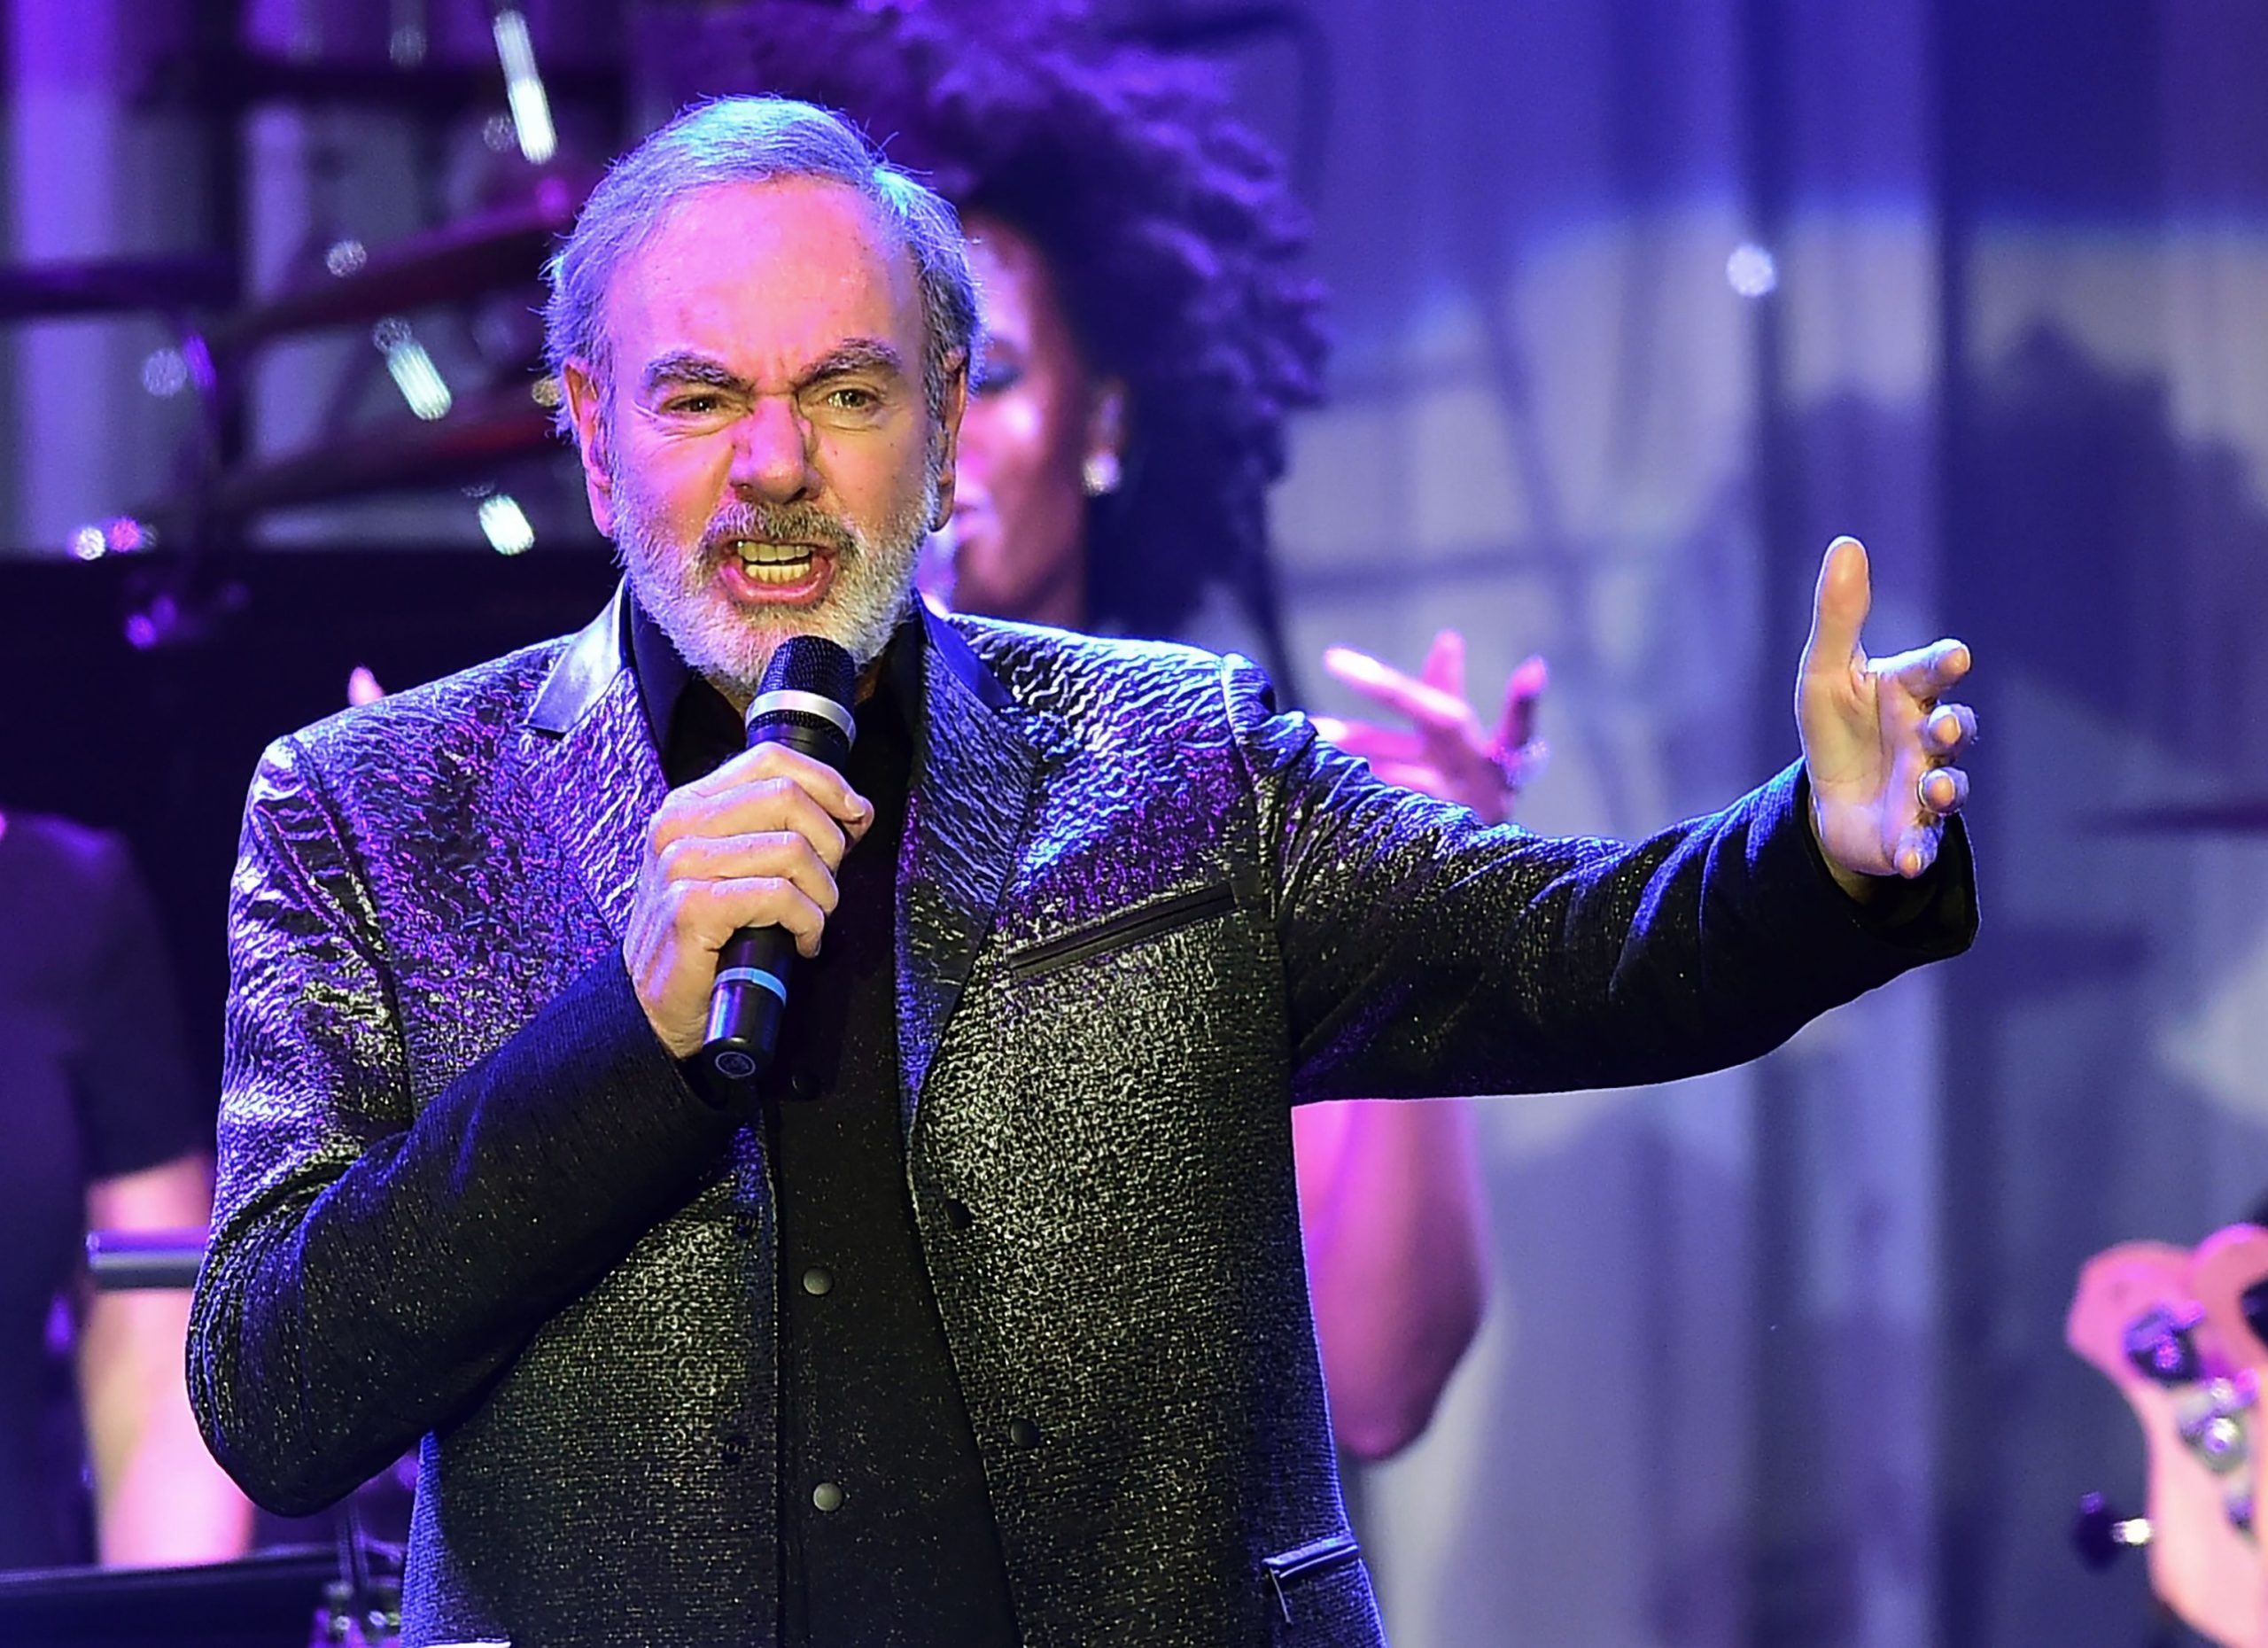 Sweet Caroline,' sweet deal: Neil Diamond sells song rights to